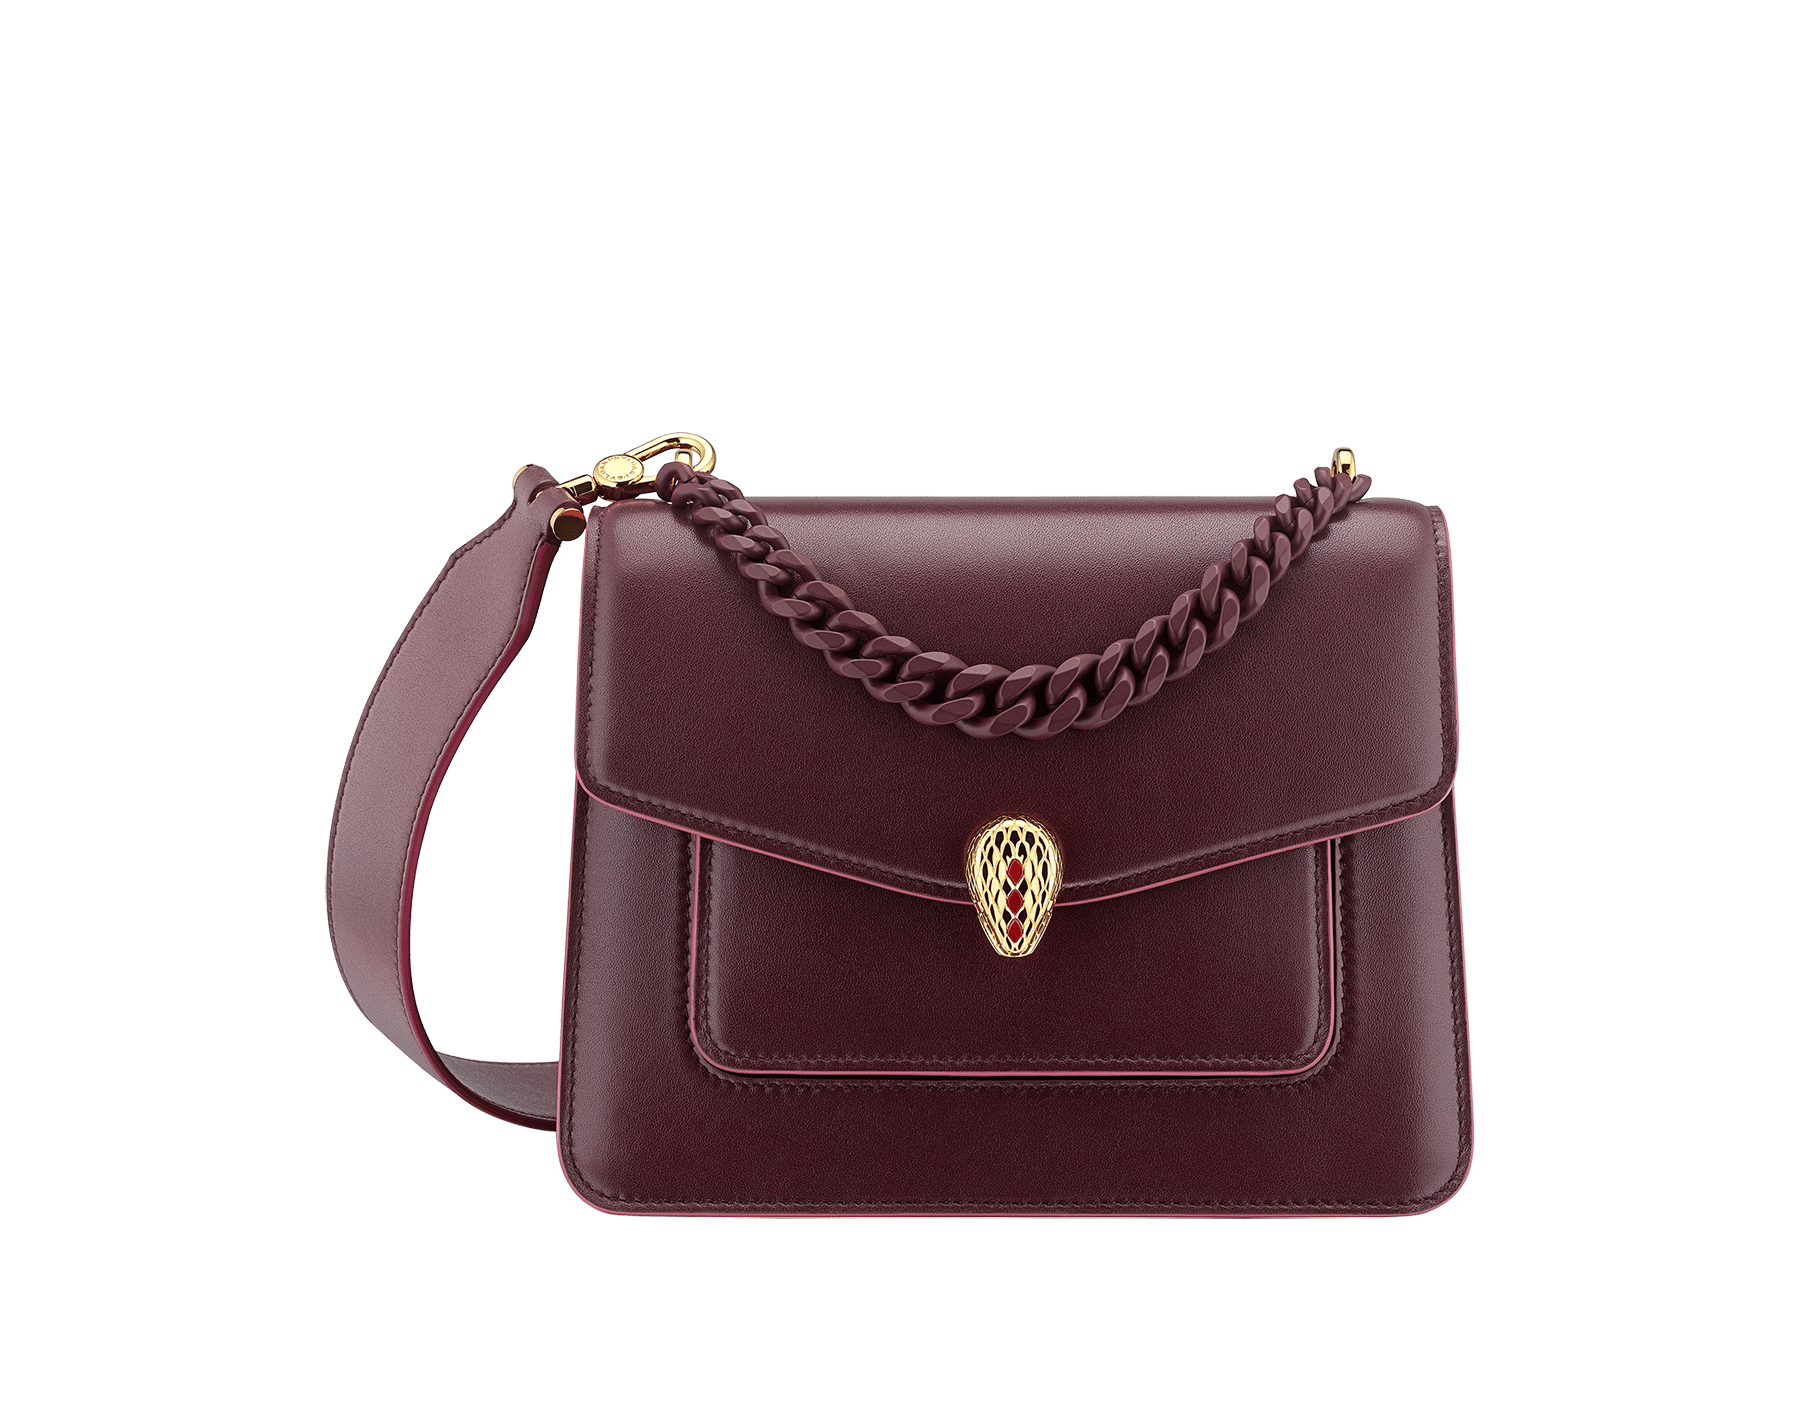 "Serpenti Forever" small maxi chain crossbody bag in black nappa leather, with black nappa leather inner lining. New Serpenti head closure in dark ruthenium-plated brass and finished with small black onyx scales in the middle and red enamel eyes. 1134-MCNb image 1